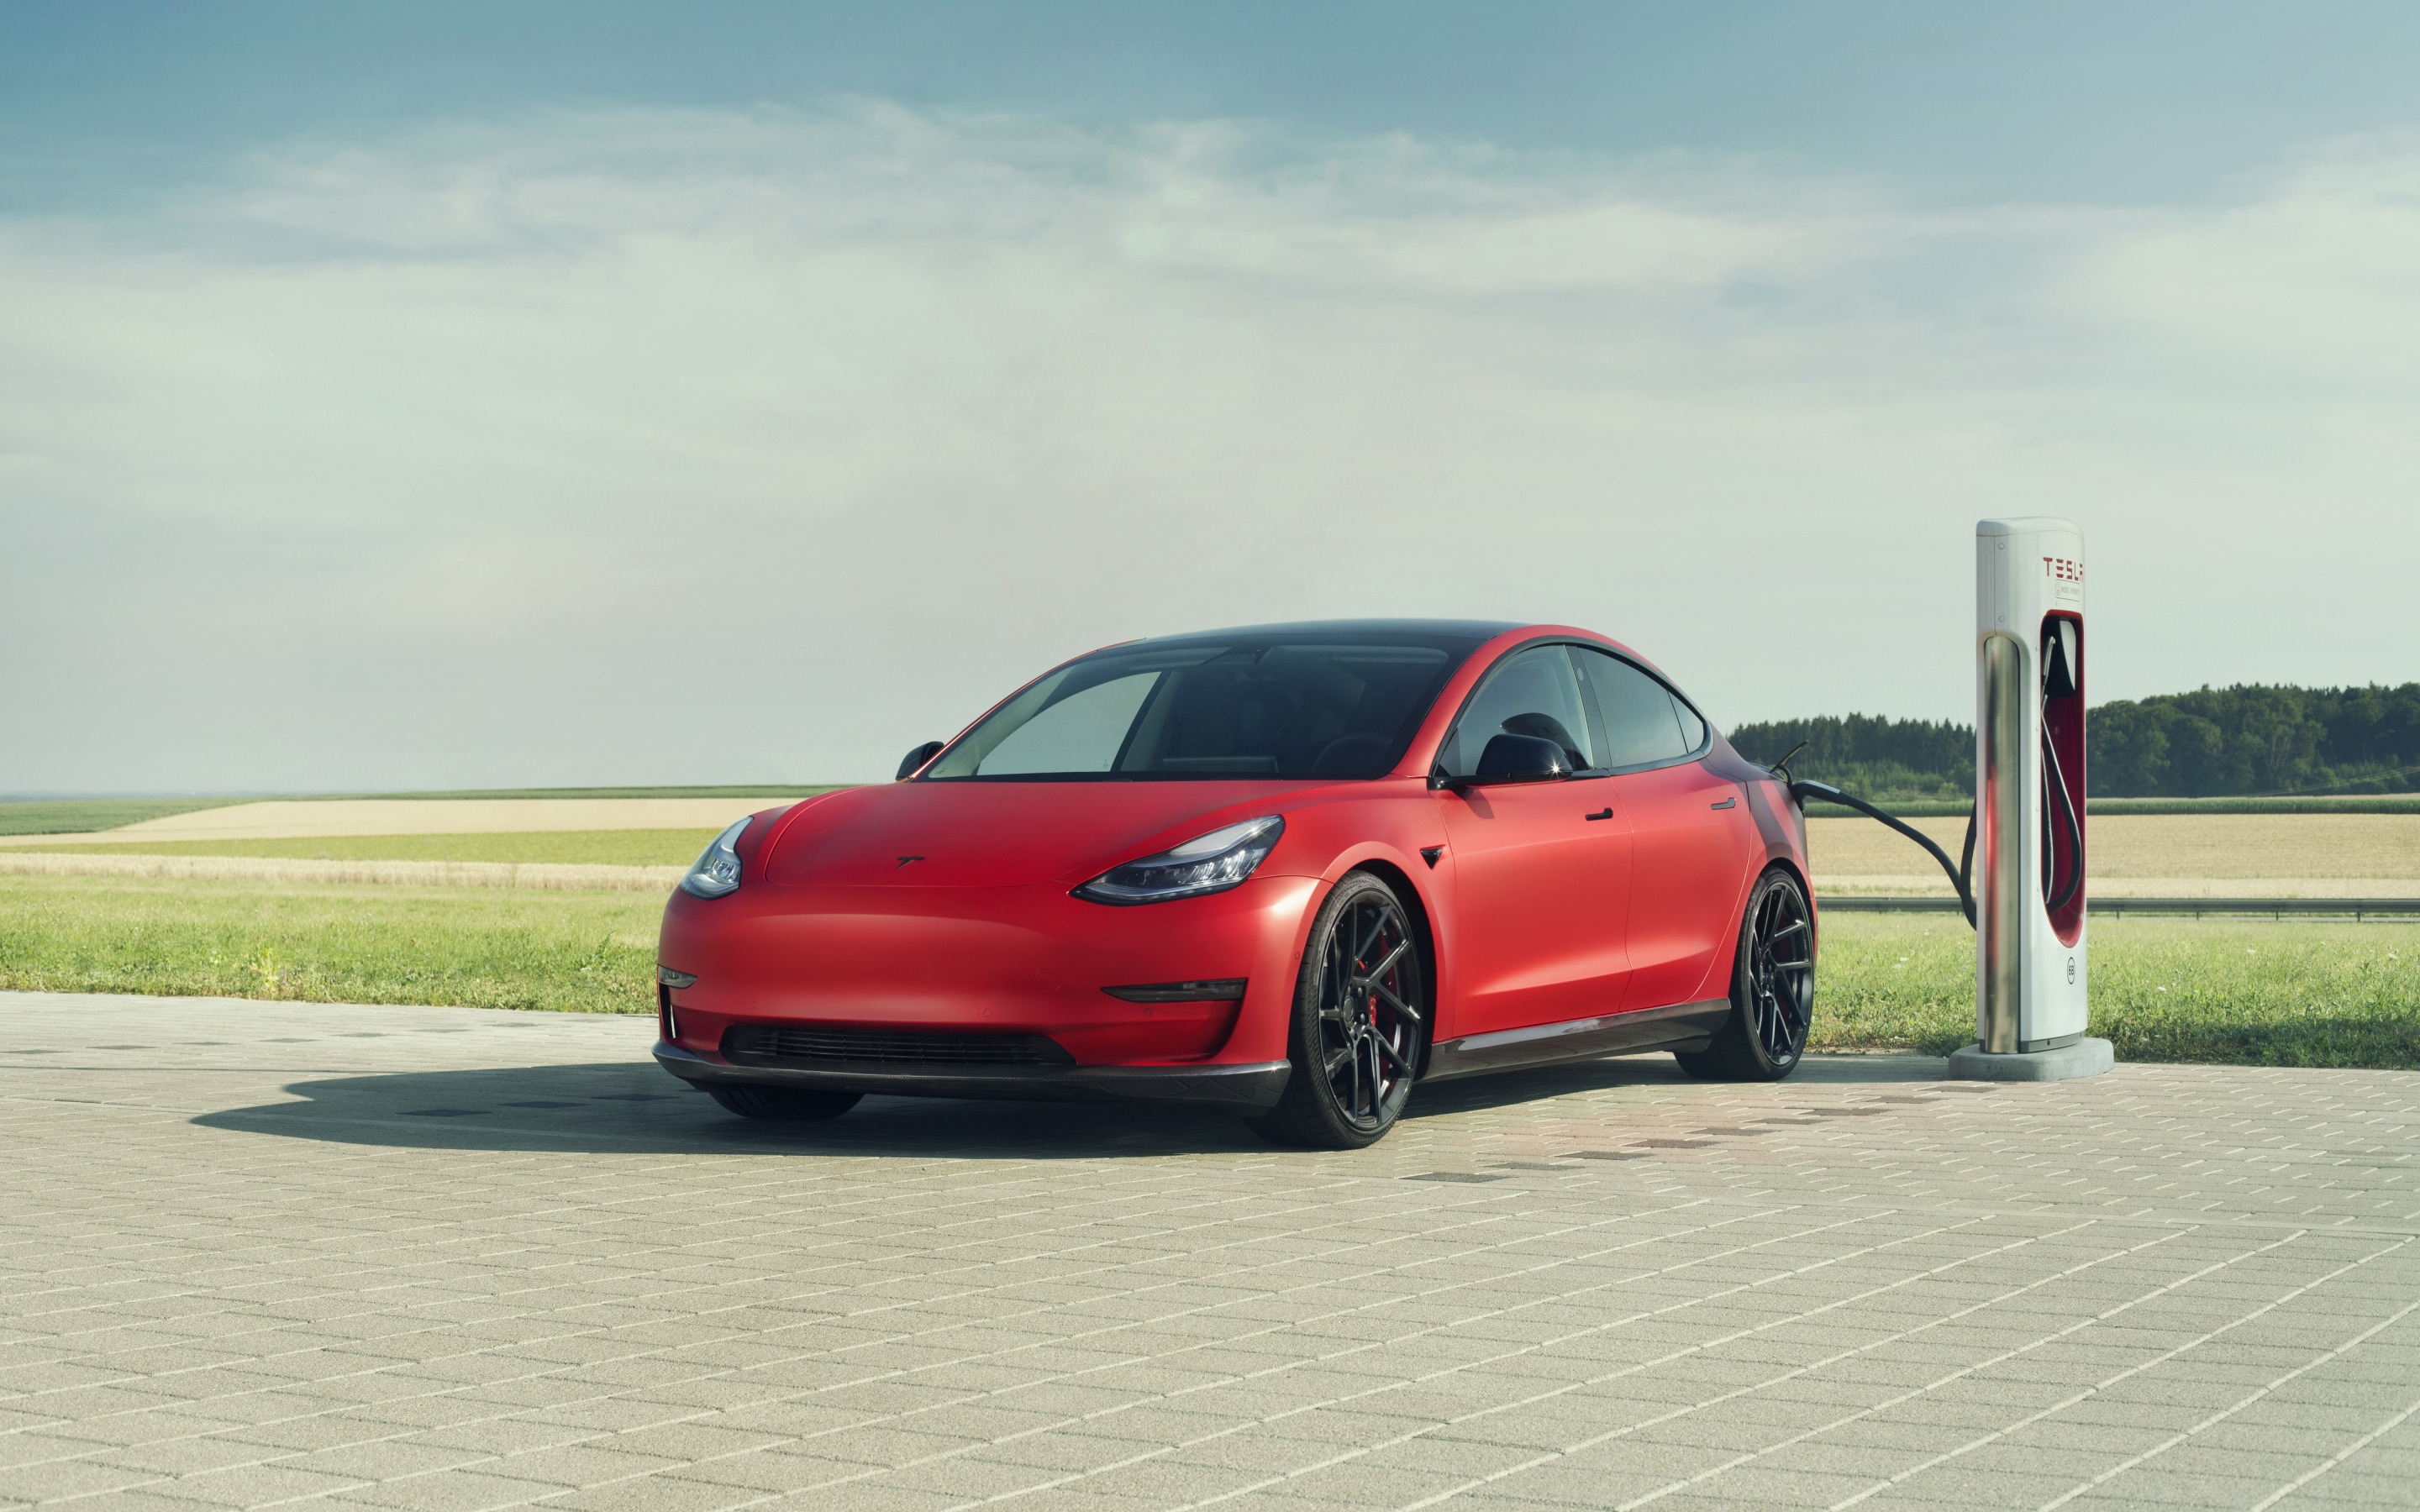 Download wallpaper Novitec, Tesla Model exterior, front view, red electric car, new red Model electric cars, Tesla, electric car charging for desktop with resolution 2880x1800. High Quality HD picture wallpaper